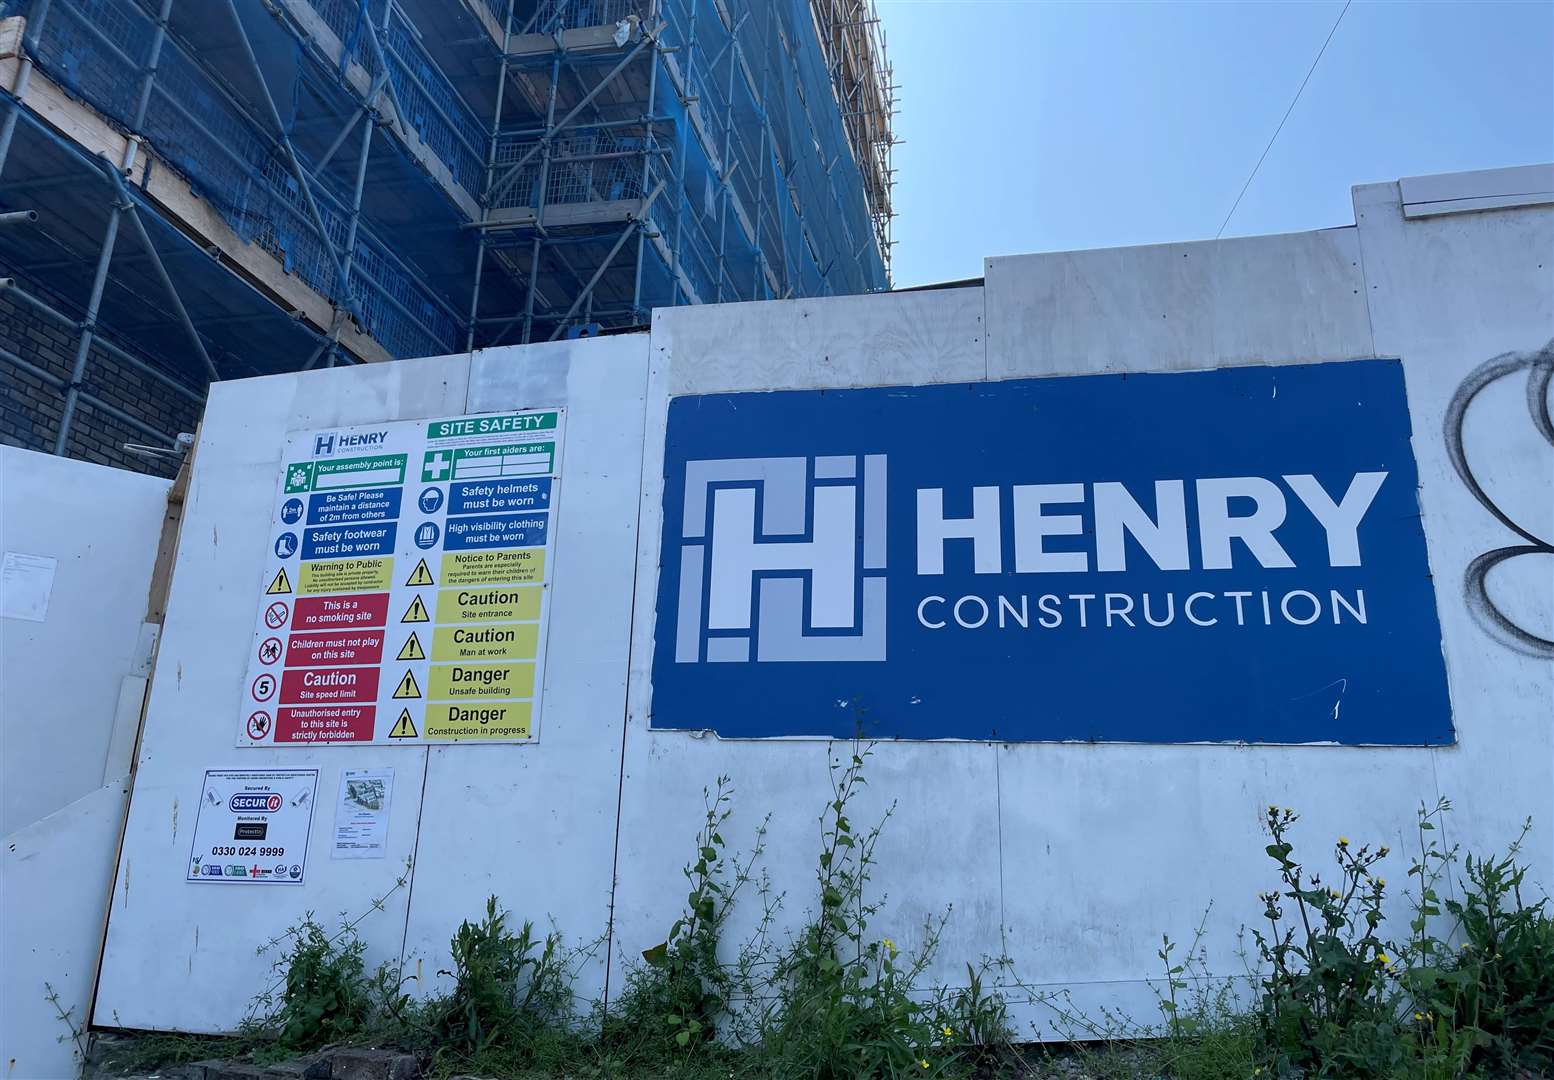 Henry Construction has gone into administration